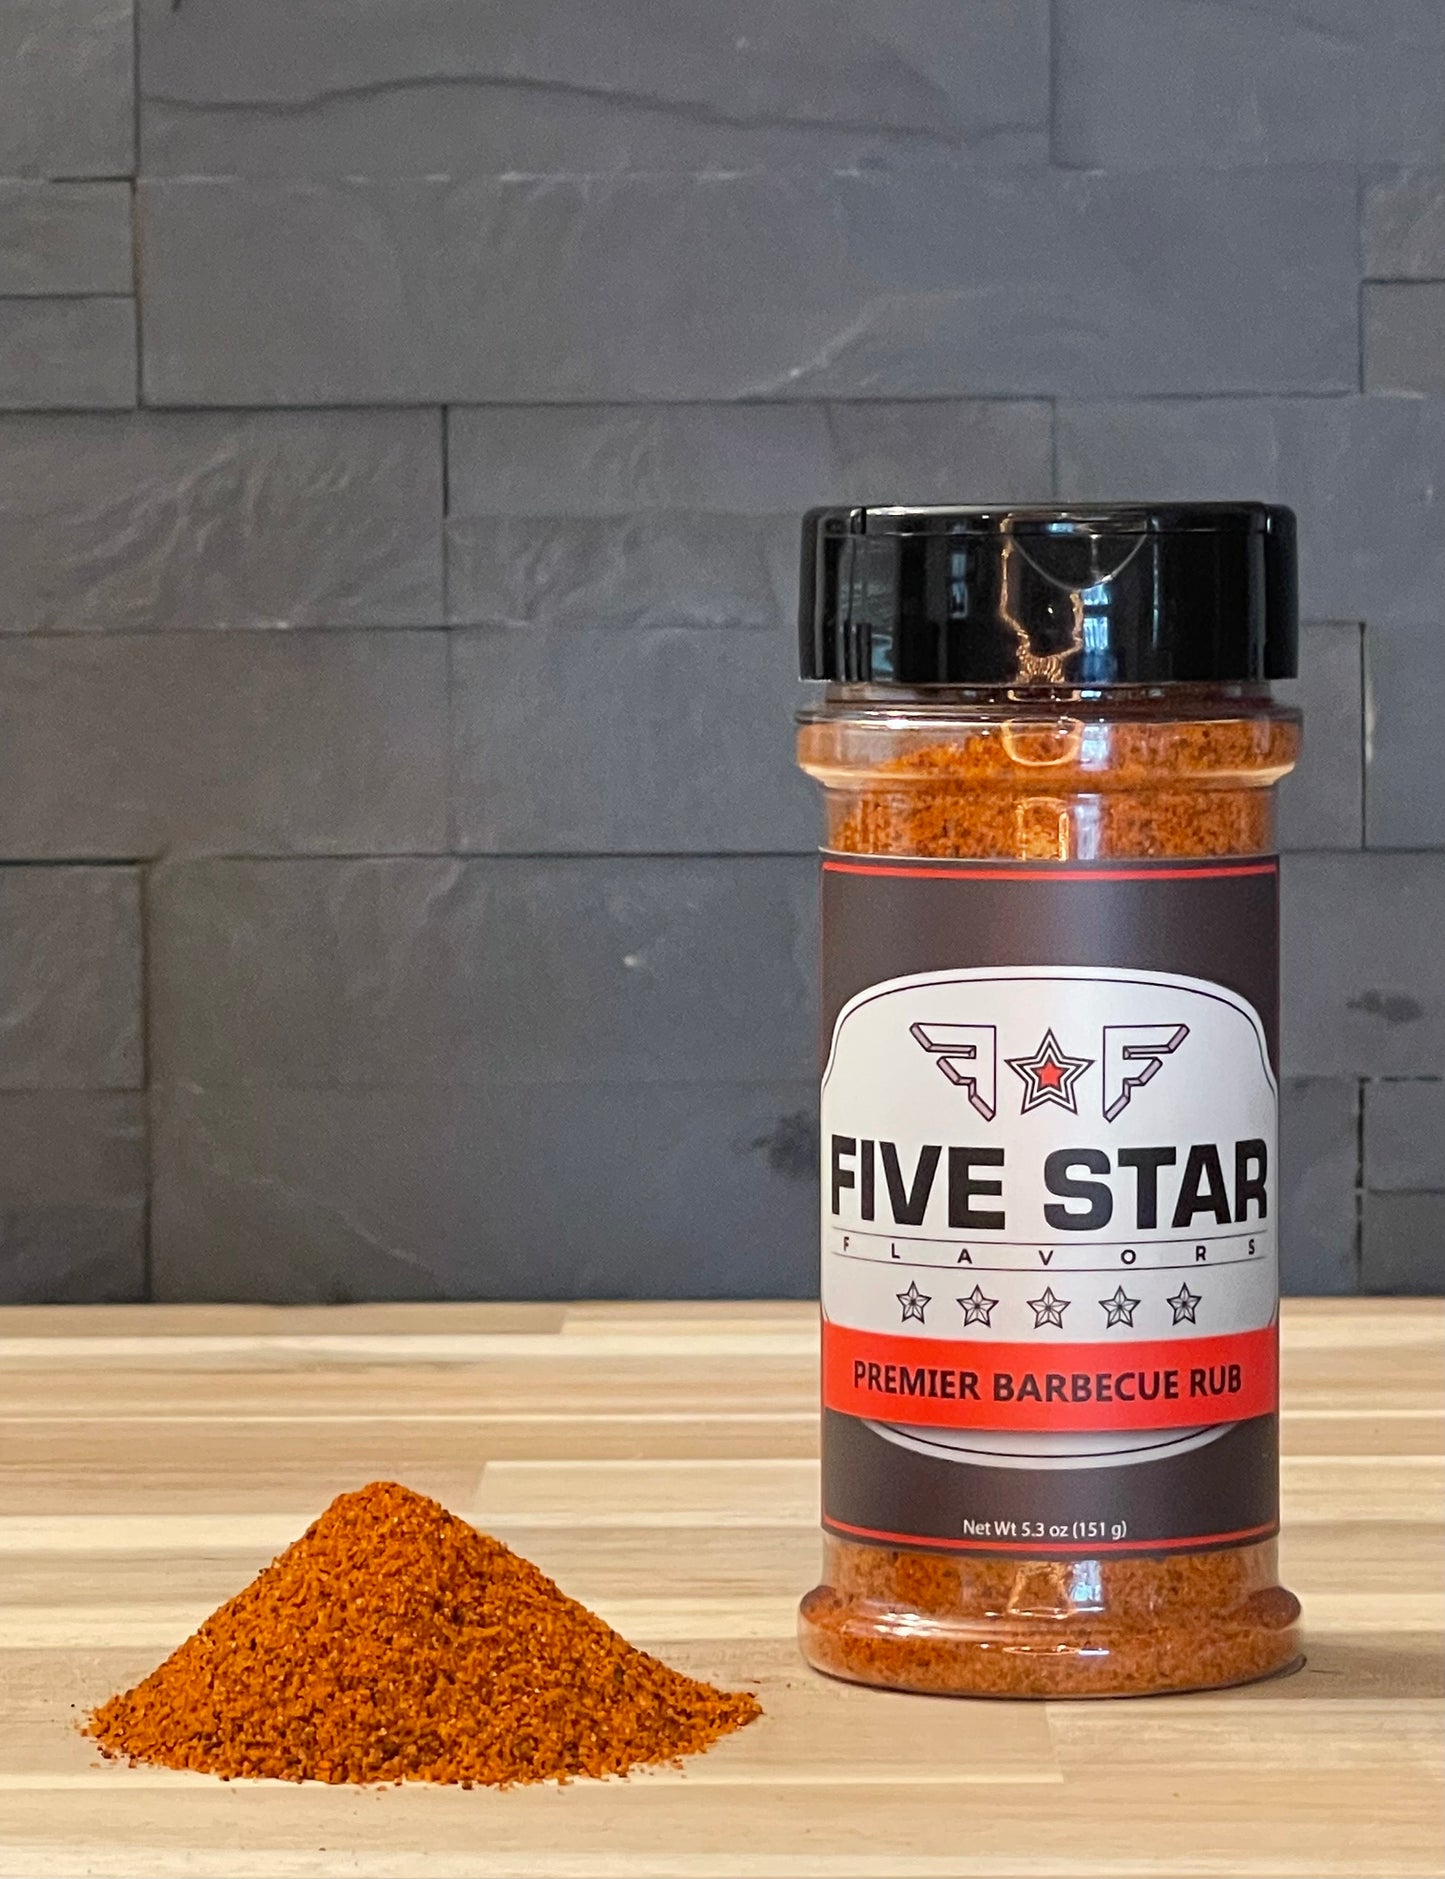 Five Star Flavors Premier Barbecue Rub - 5.3 oz (151g) – Dry Rub for Pork, Chicken and Other Meats